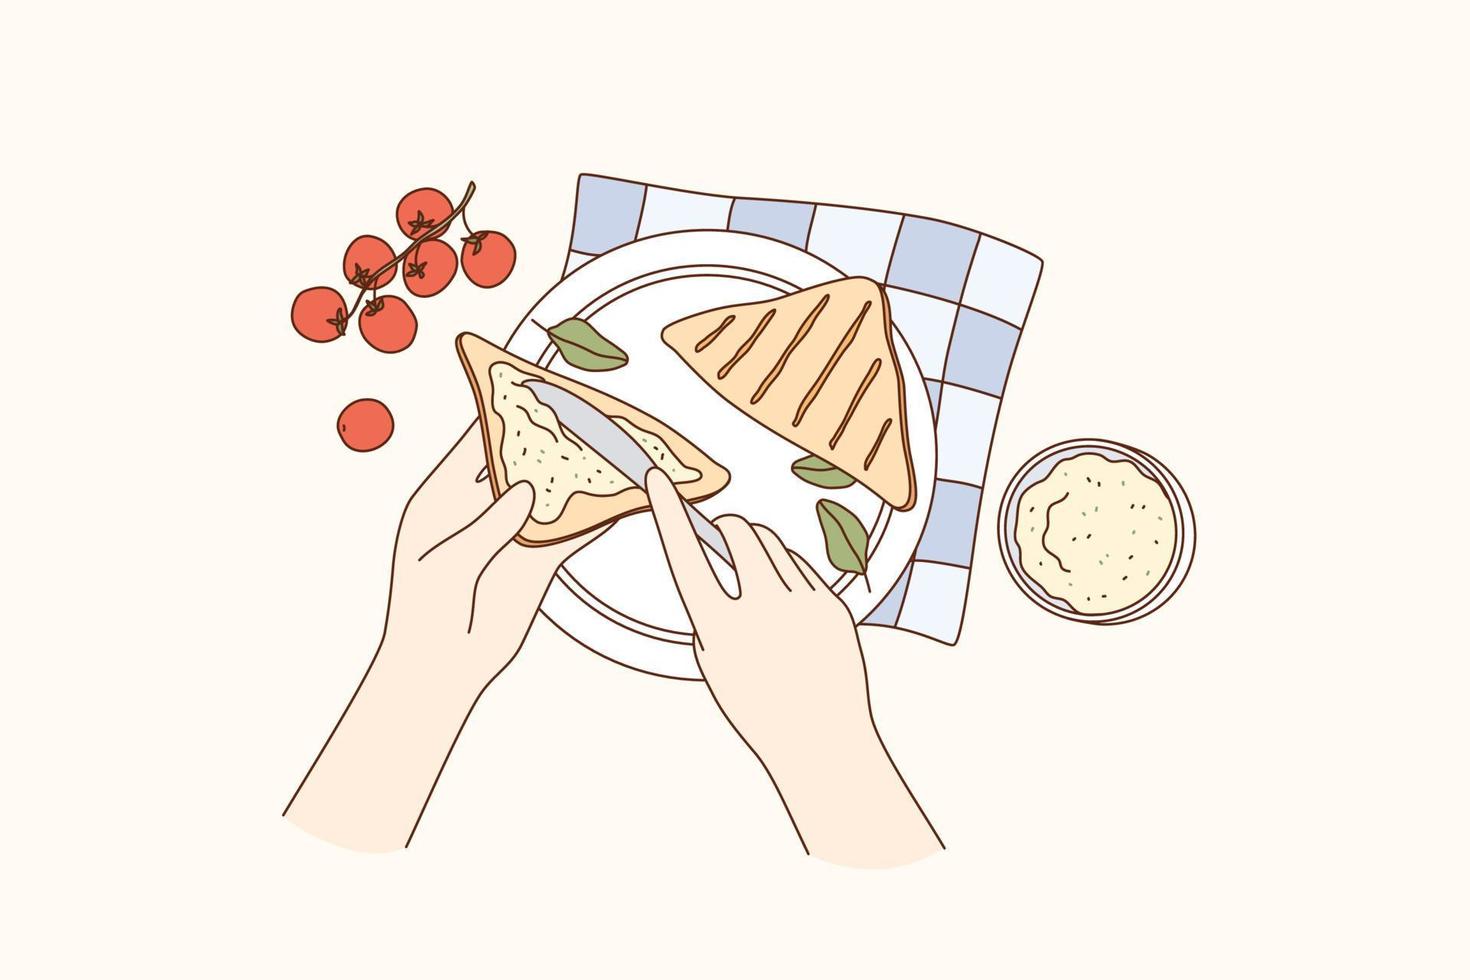 Cooking, food preparation, breakfast concept. Human hands making sandwich with cherry tomato cream cheese and herbs for lunch or breakfast over table vector illustration, top view